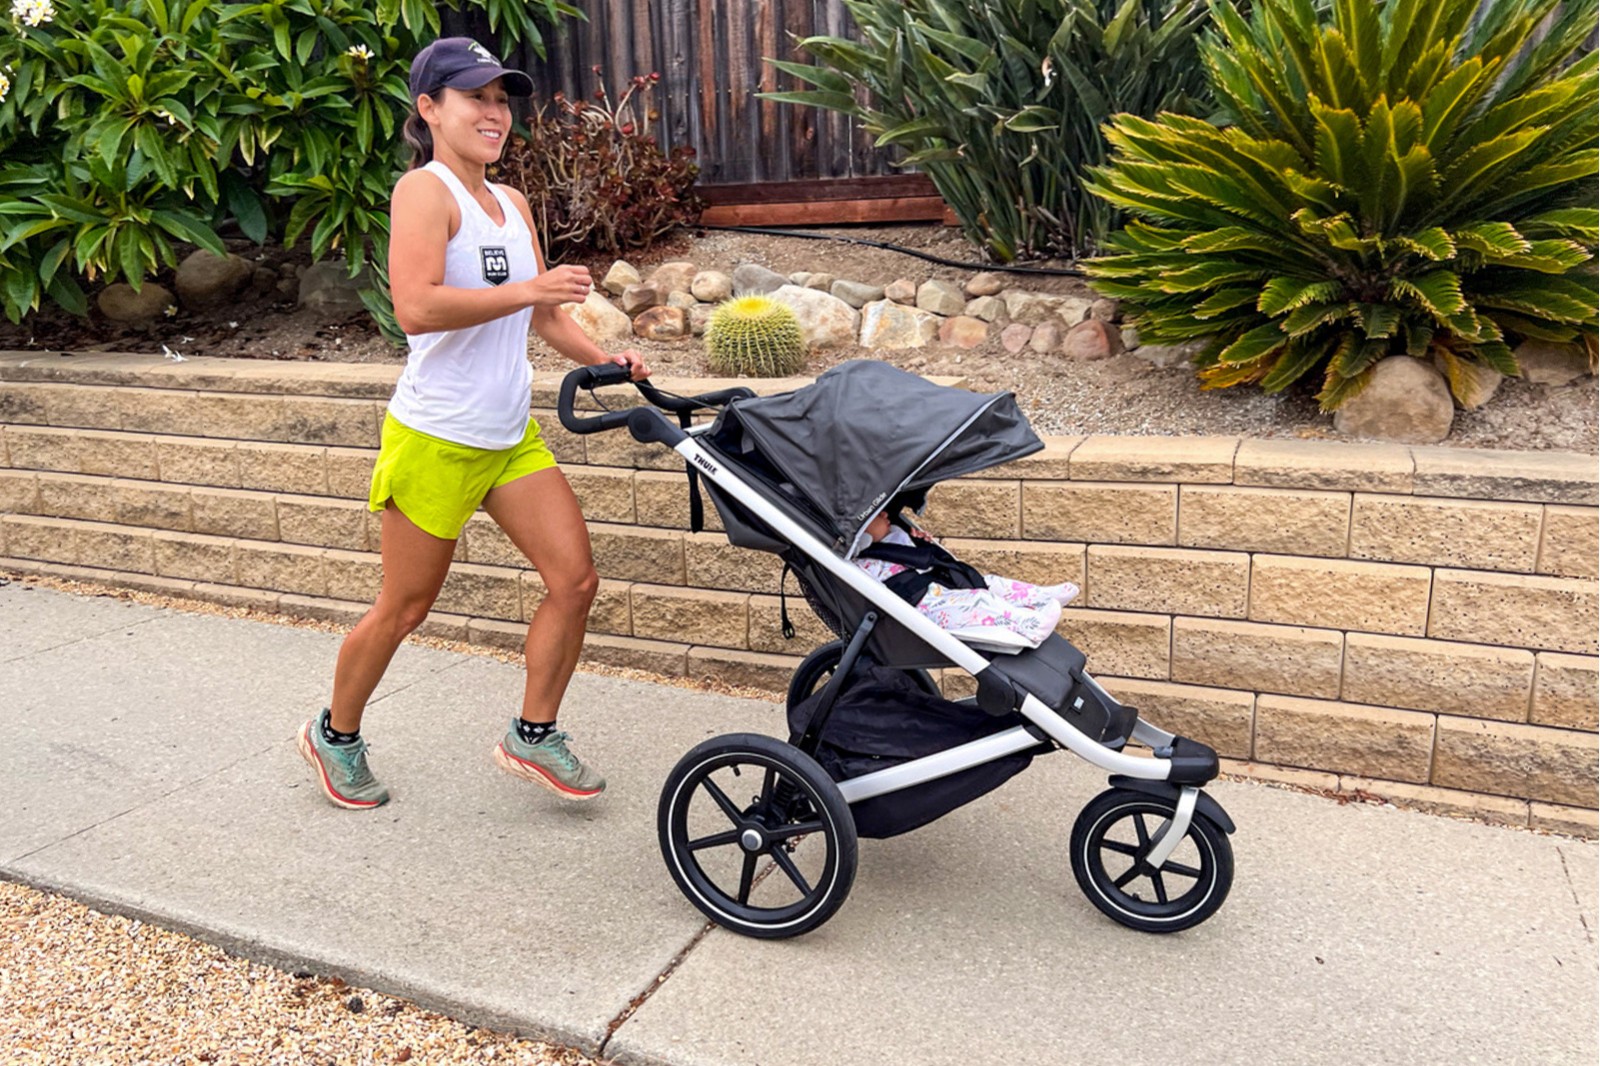 A Review of the Thule Urban Glide 2 Stroller - Cristin Cooper